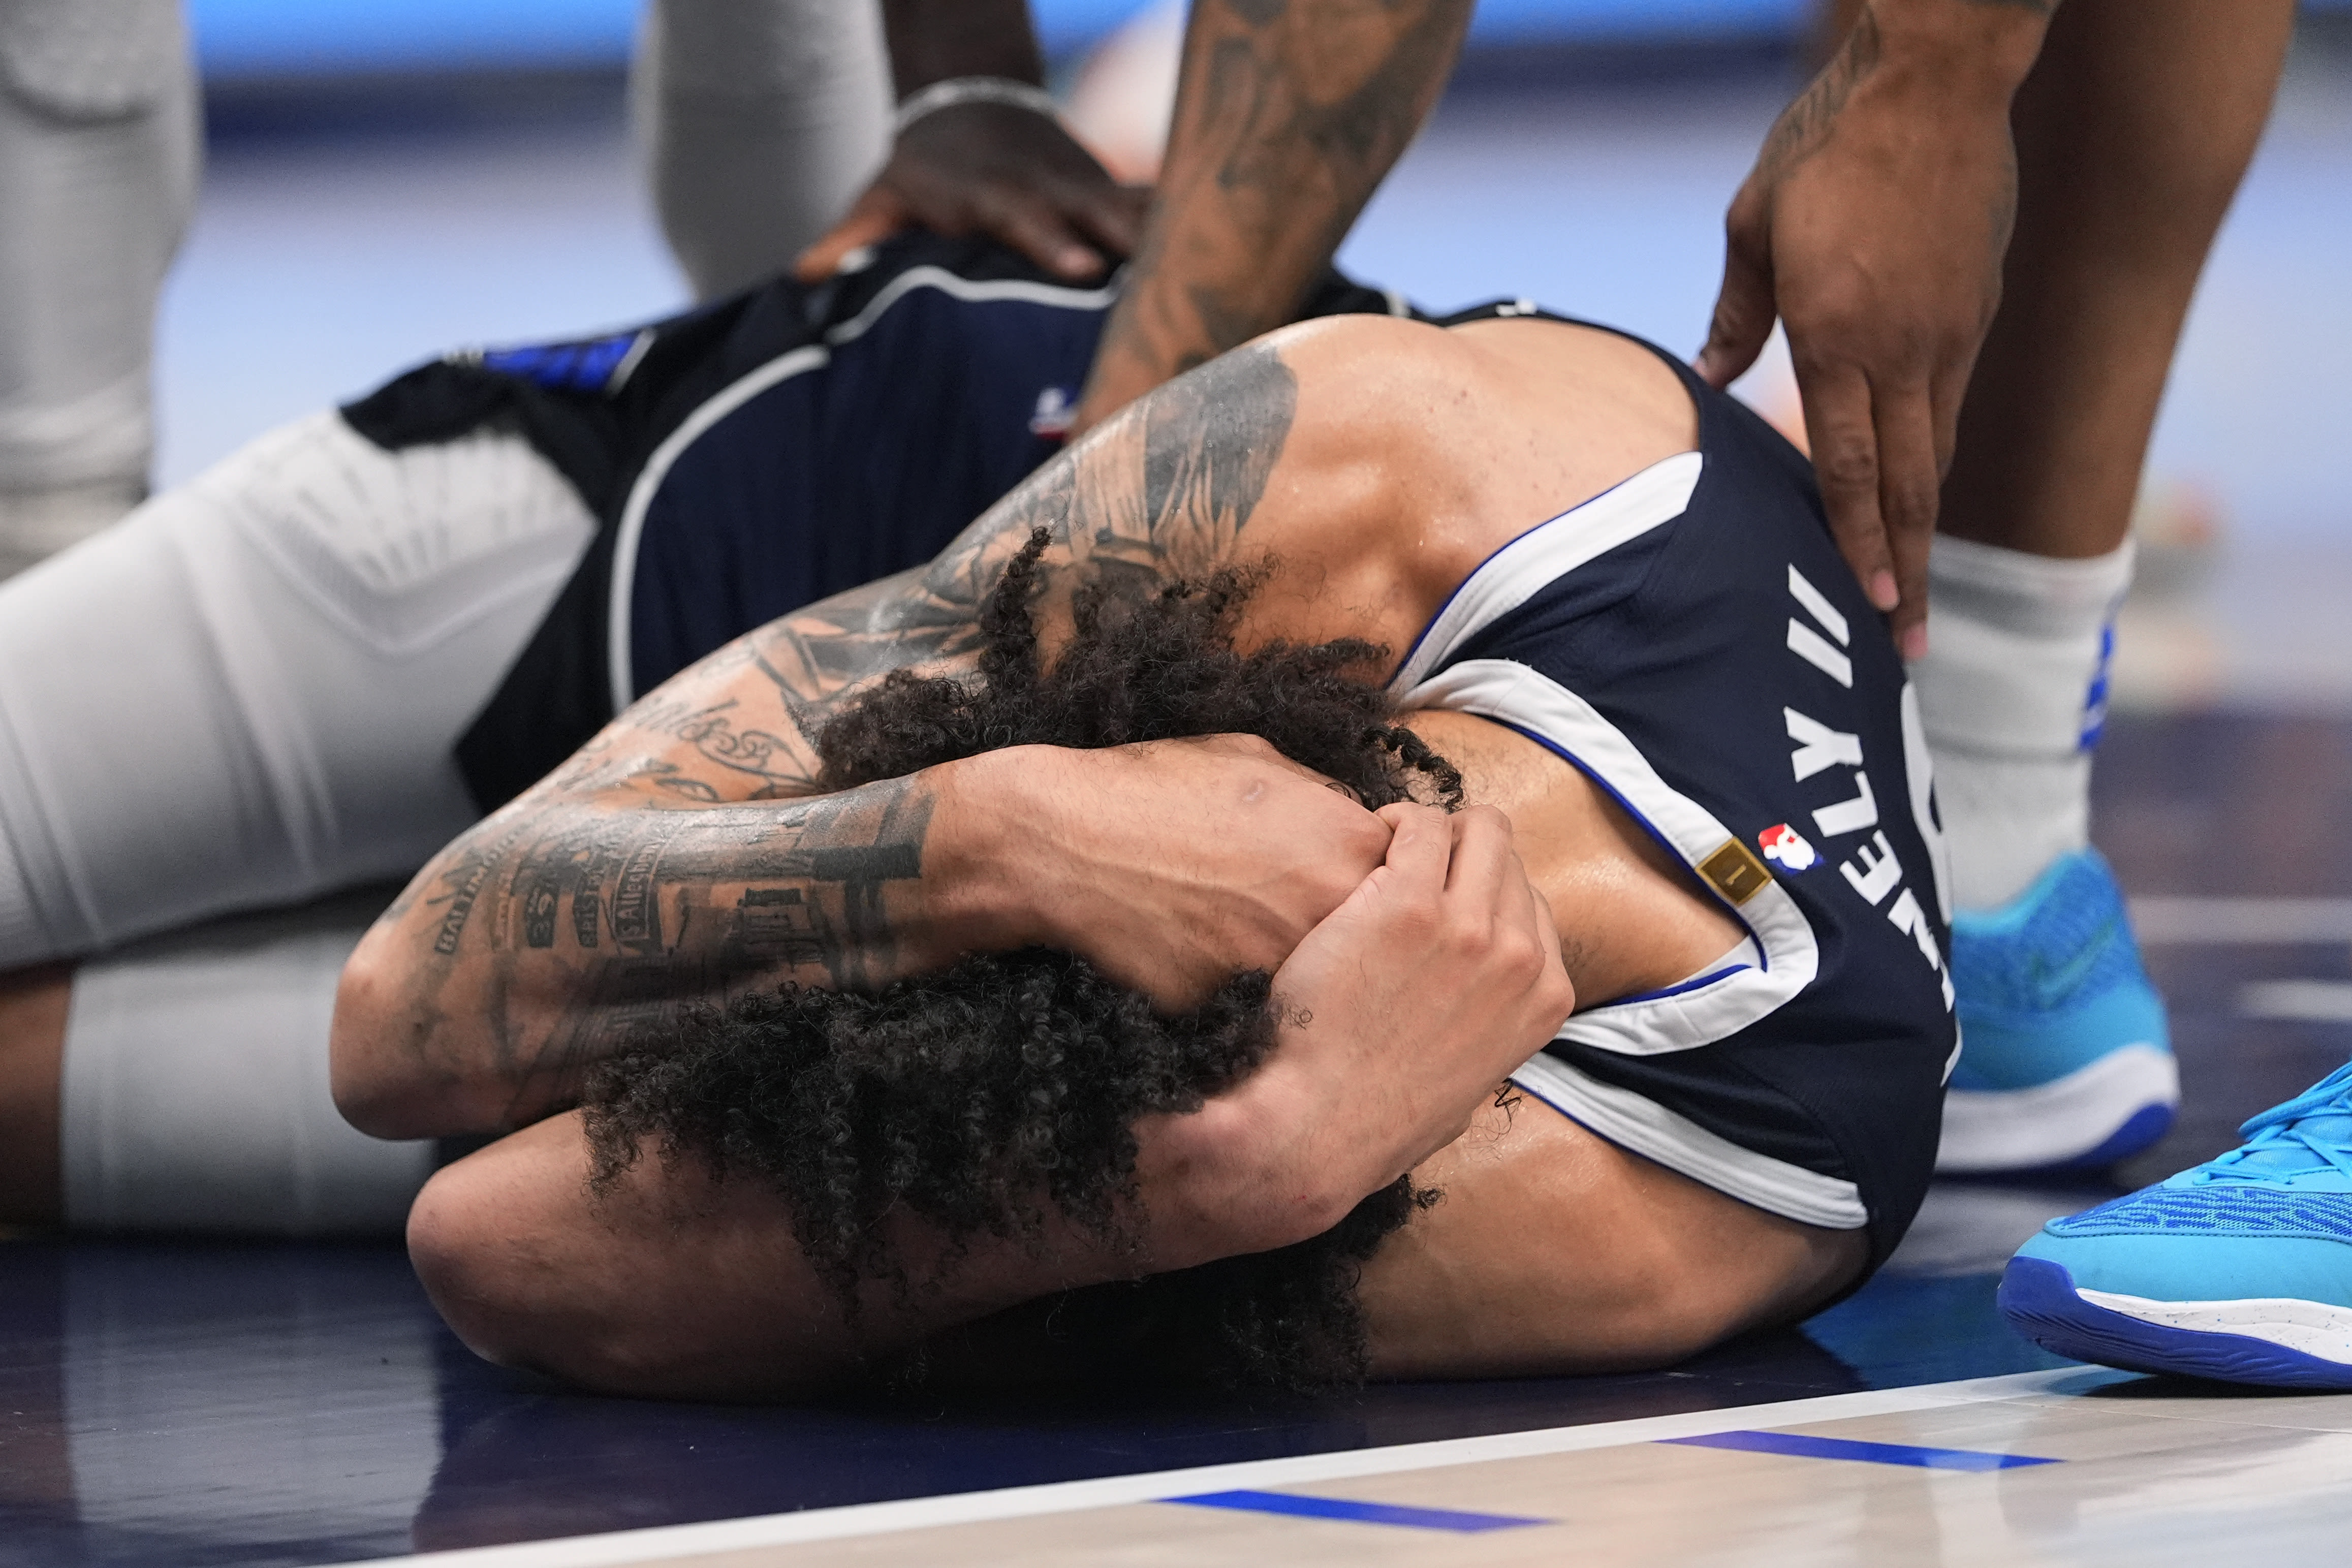 Mavs rookie center Dereck Lively II ruled out of Game 3 of West finals after taking knee to head